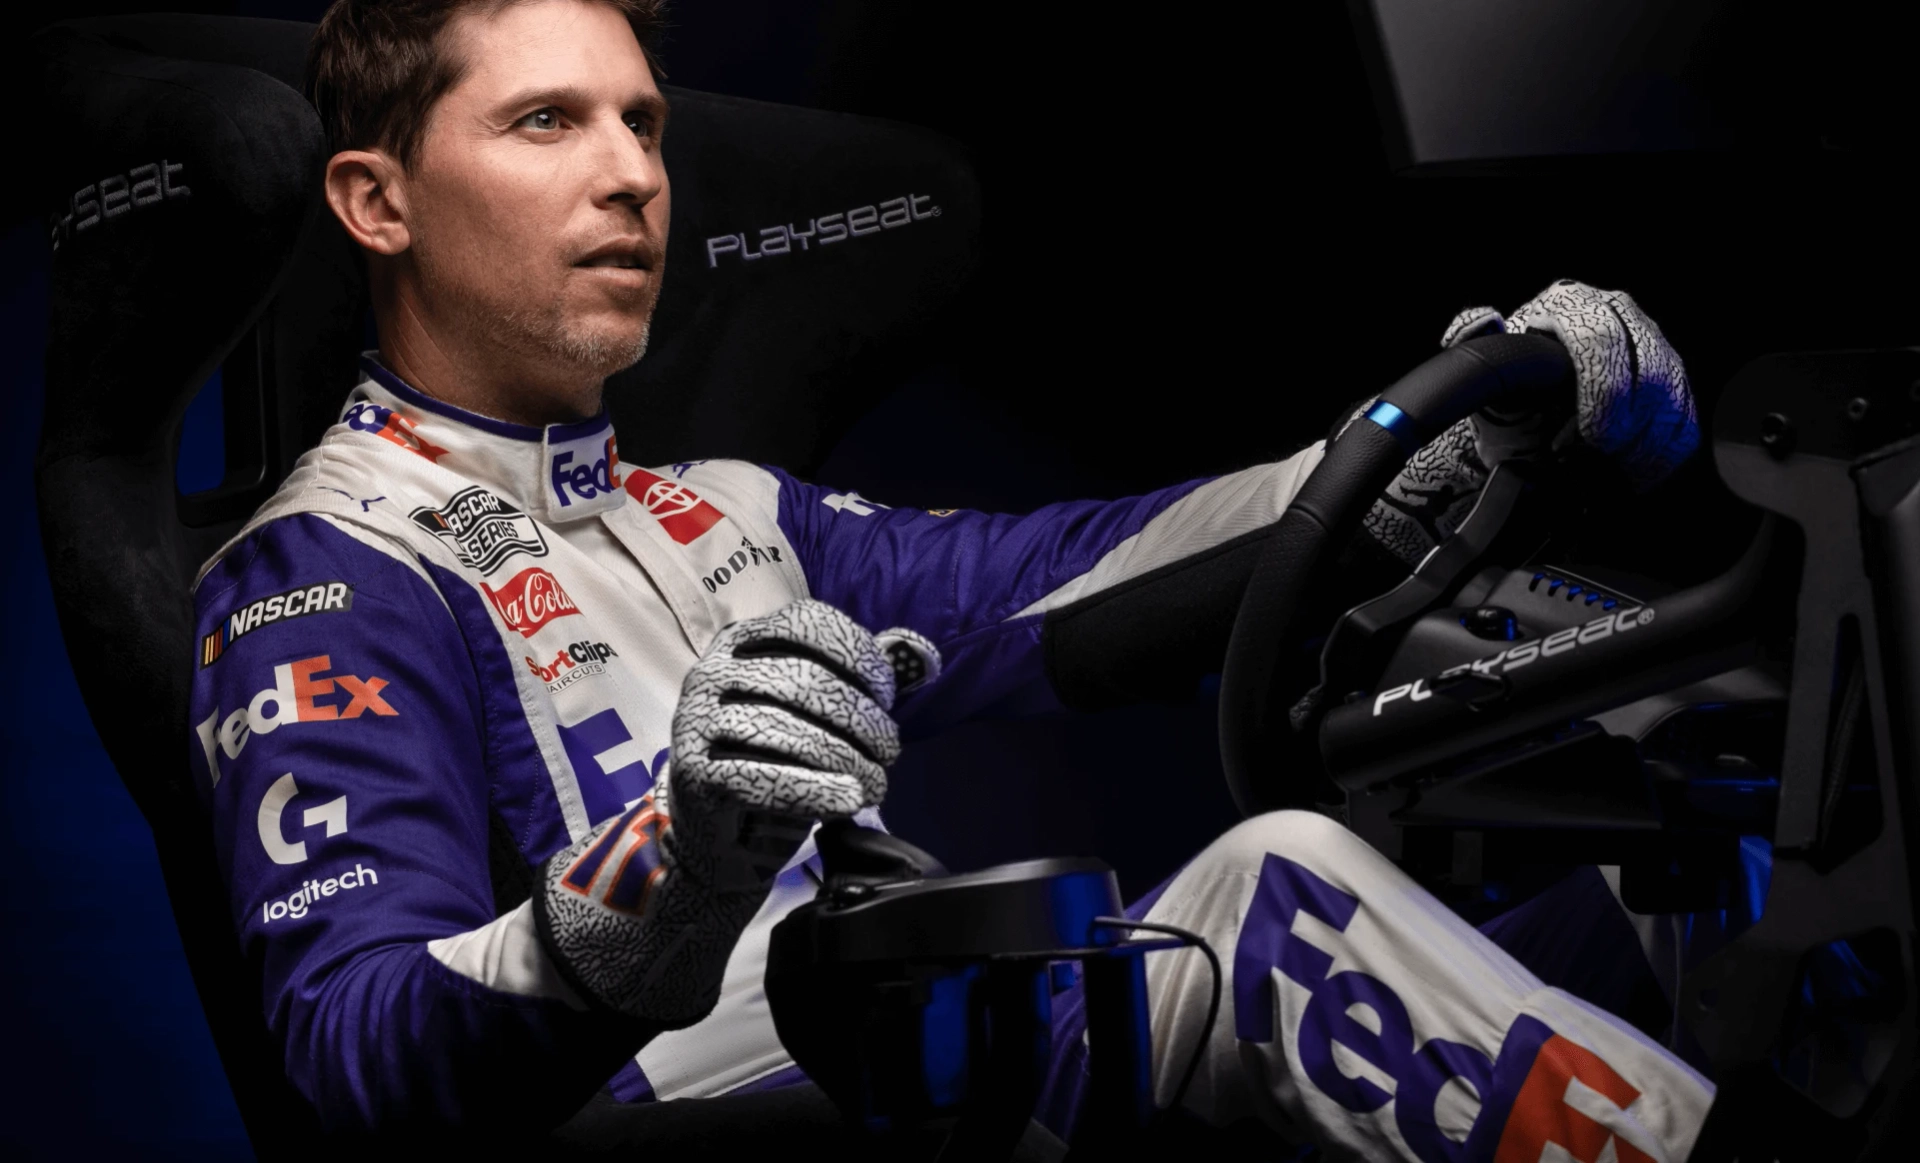 Professional stock car driver Denny Hamlin plays a racing simulation using a Playseat gaming chair and the Logitech G PRO Wheel and Pedals.